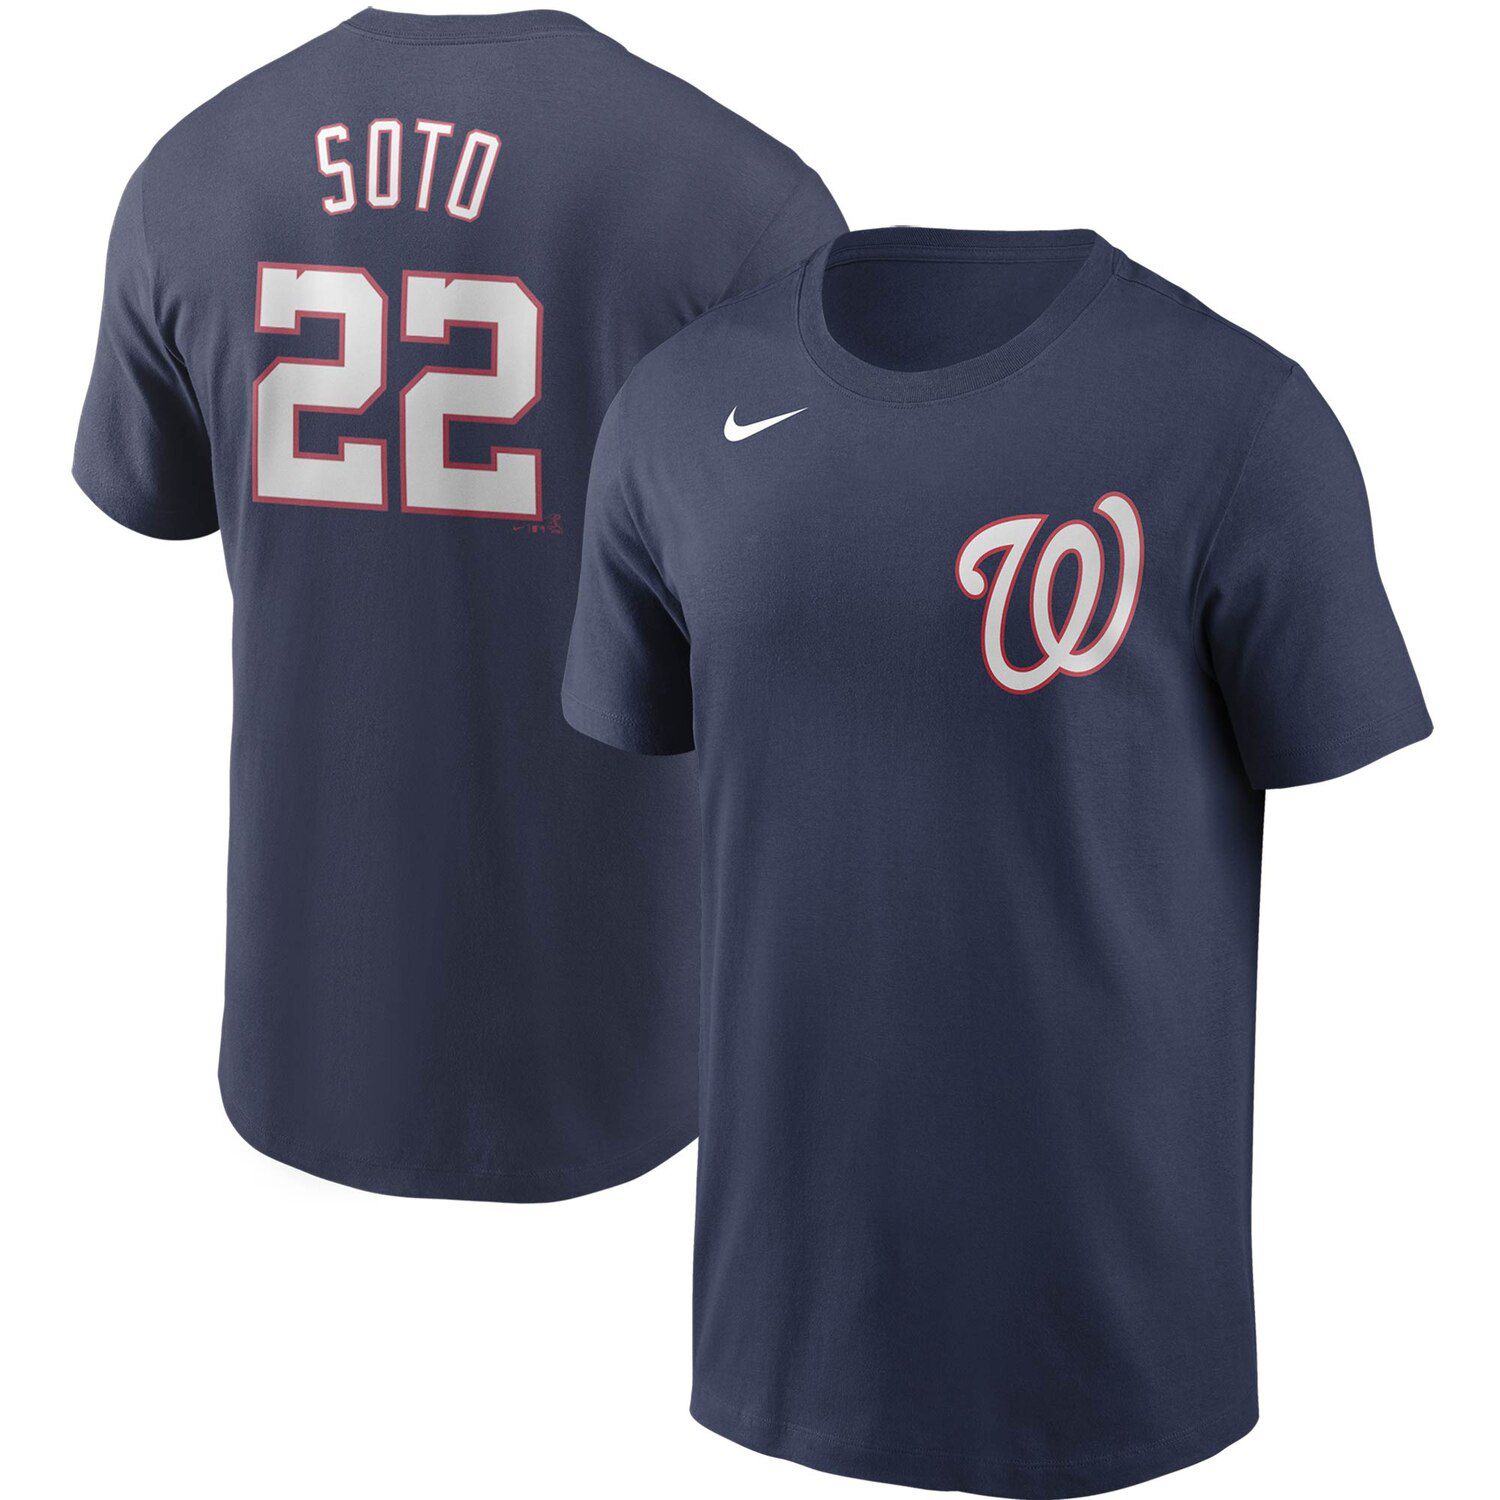 nationals nike jersey